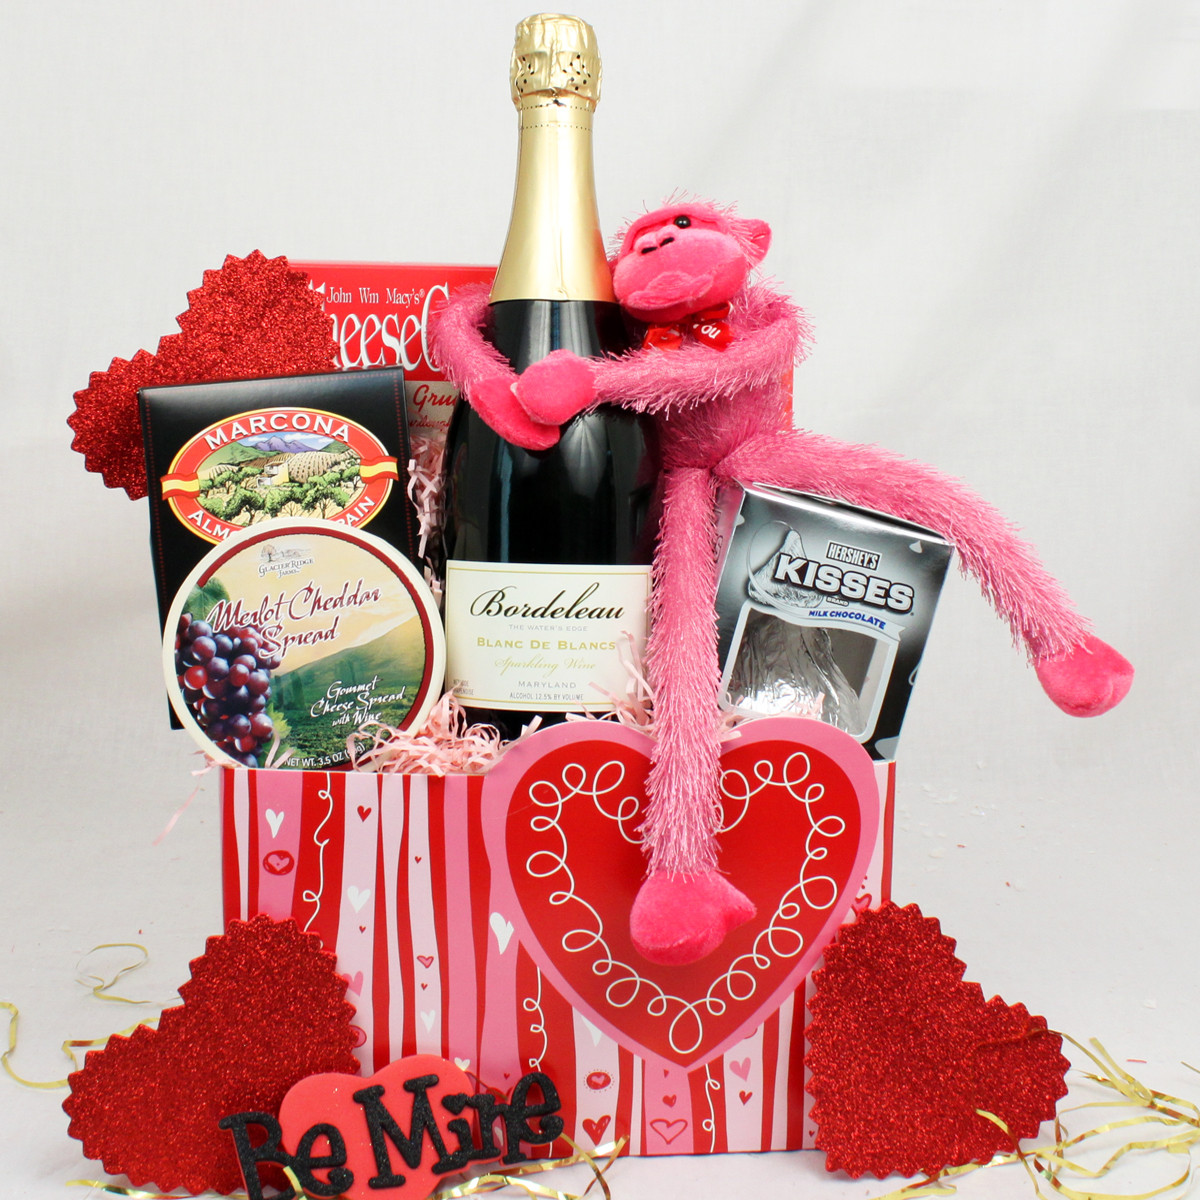 Creative Valentines Day Gift Ideas
 Creative and Thoughtful Valentine’s Day Gifts for Her